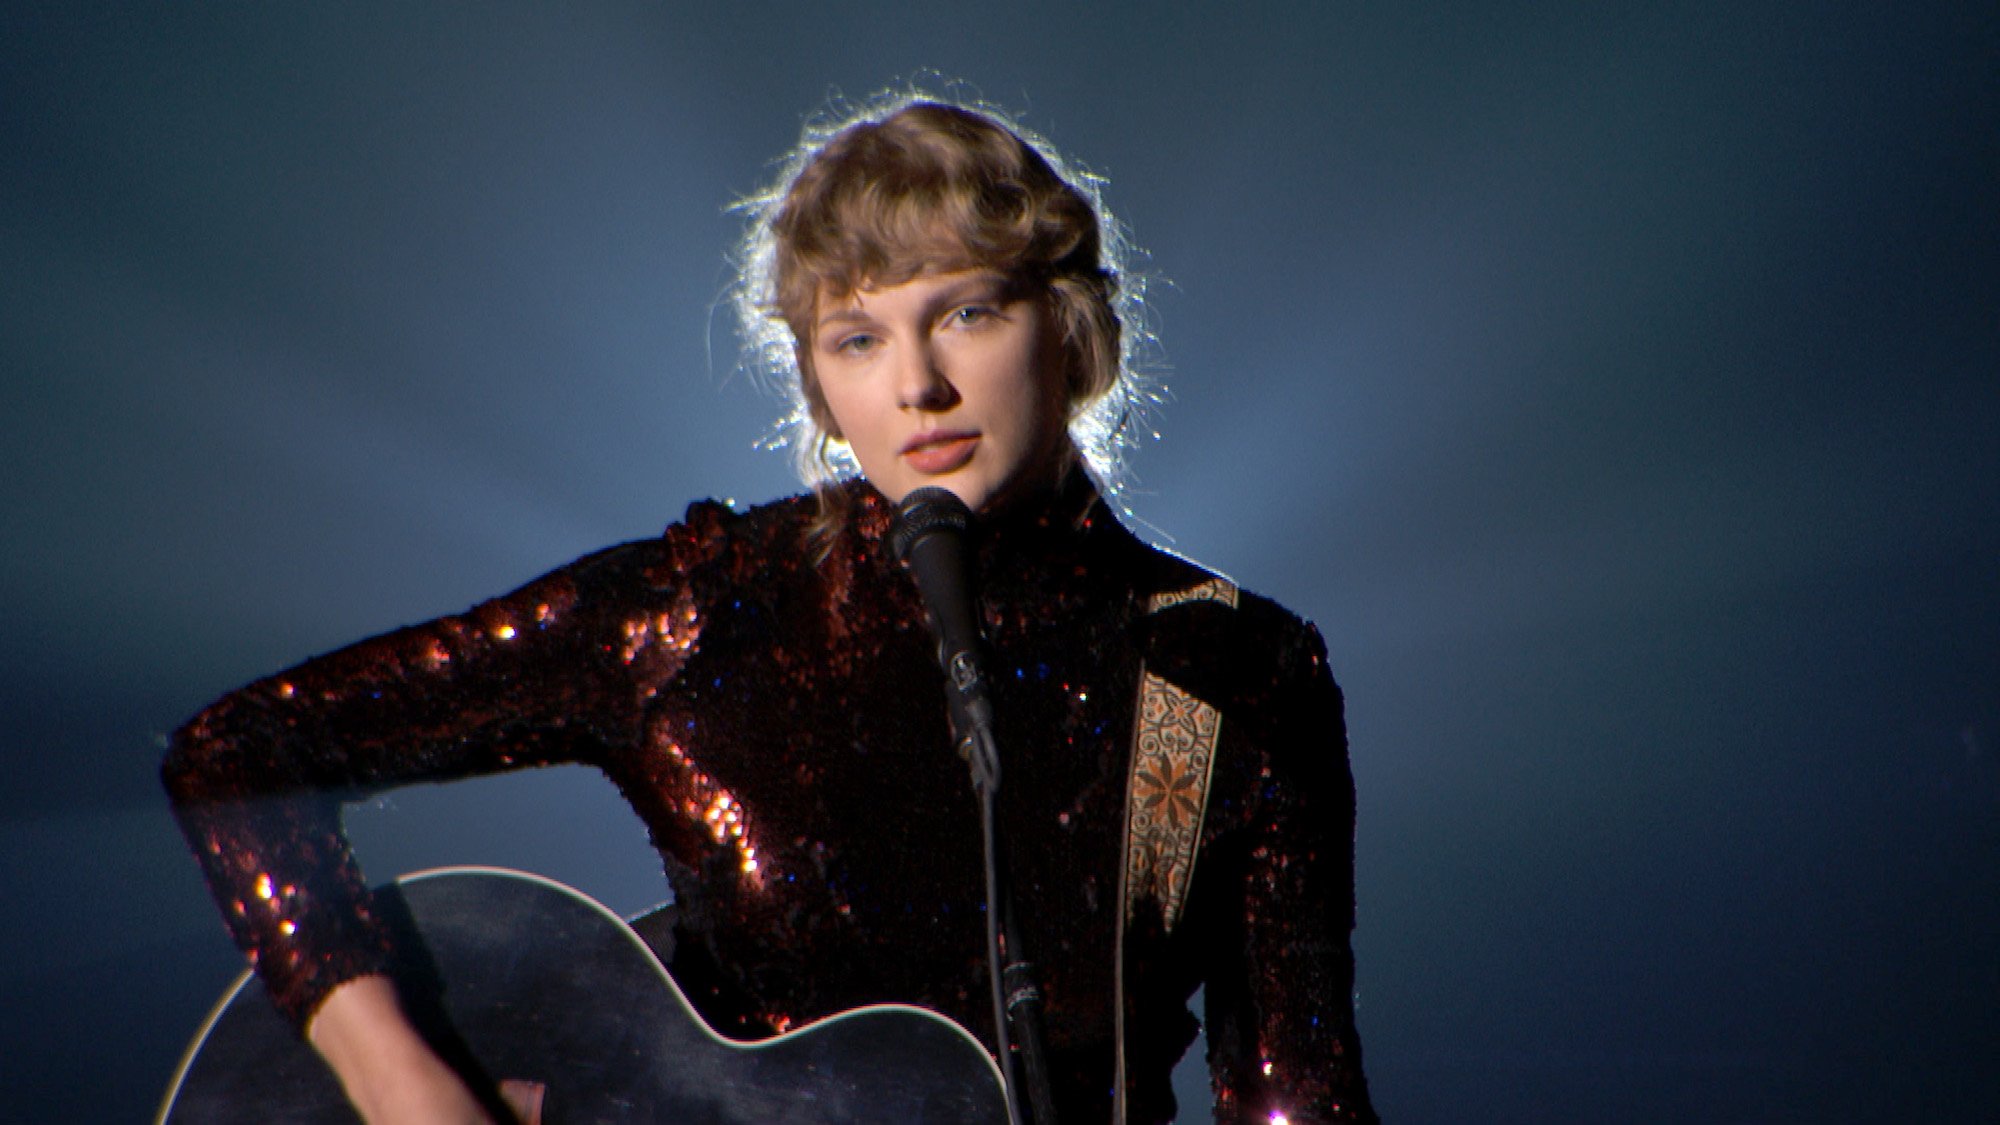 Taylor Swift performing "Betty" at the 55th Academy of Country Music Awards on Sept. 16, 2020